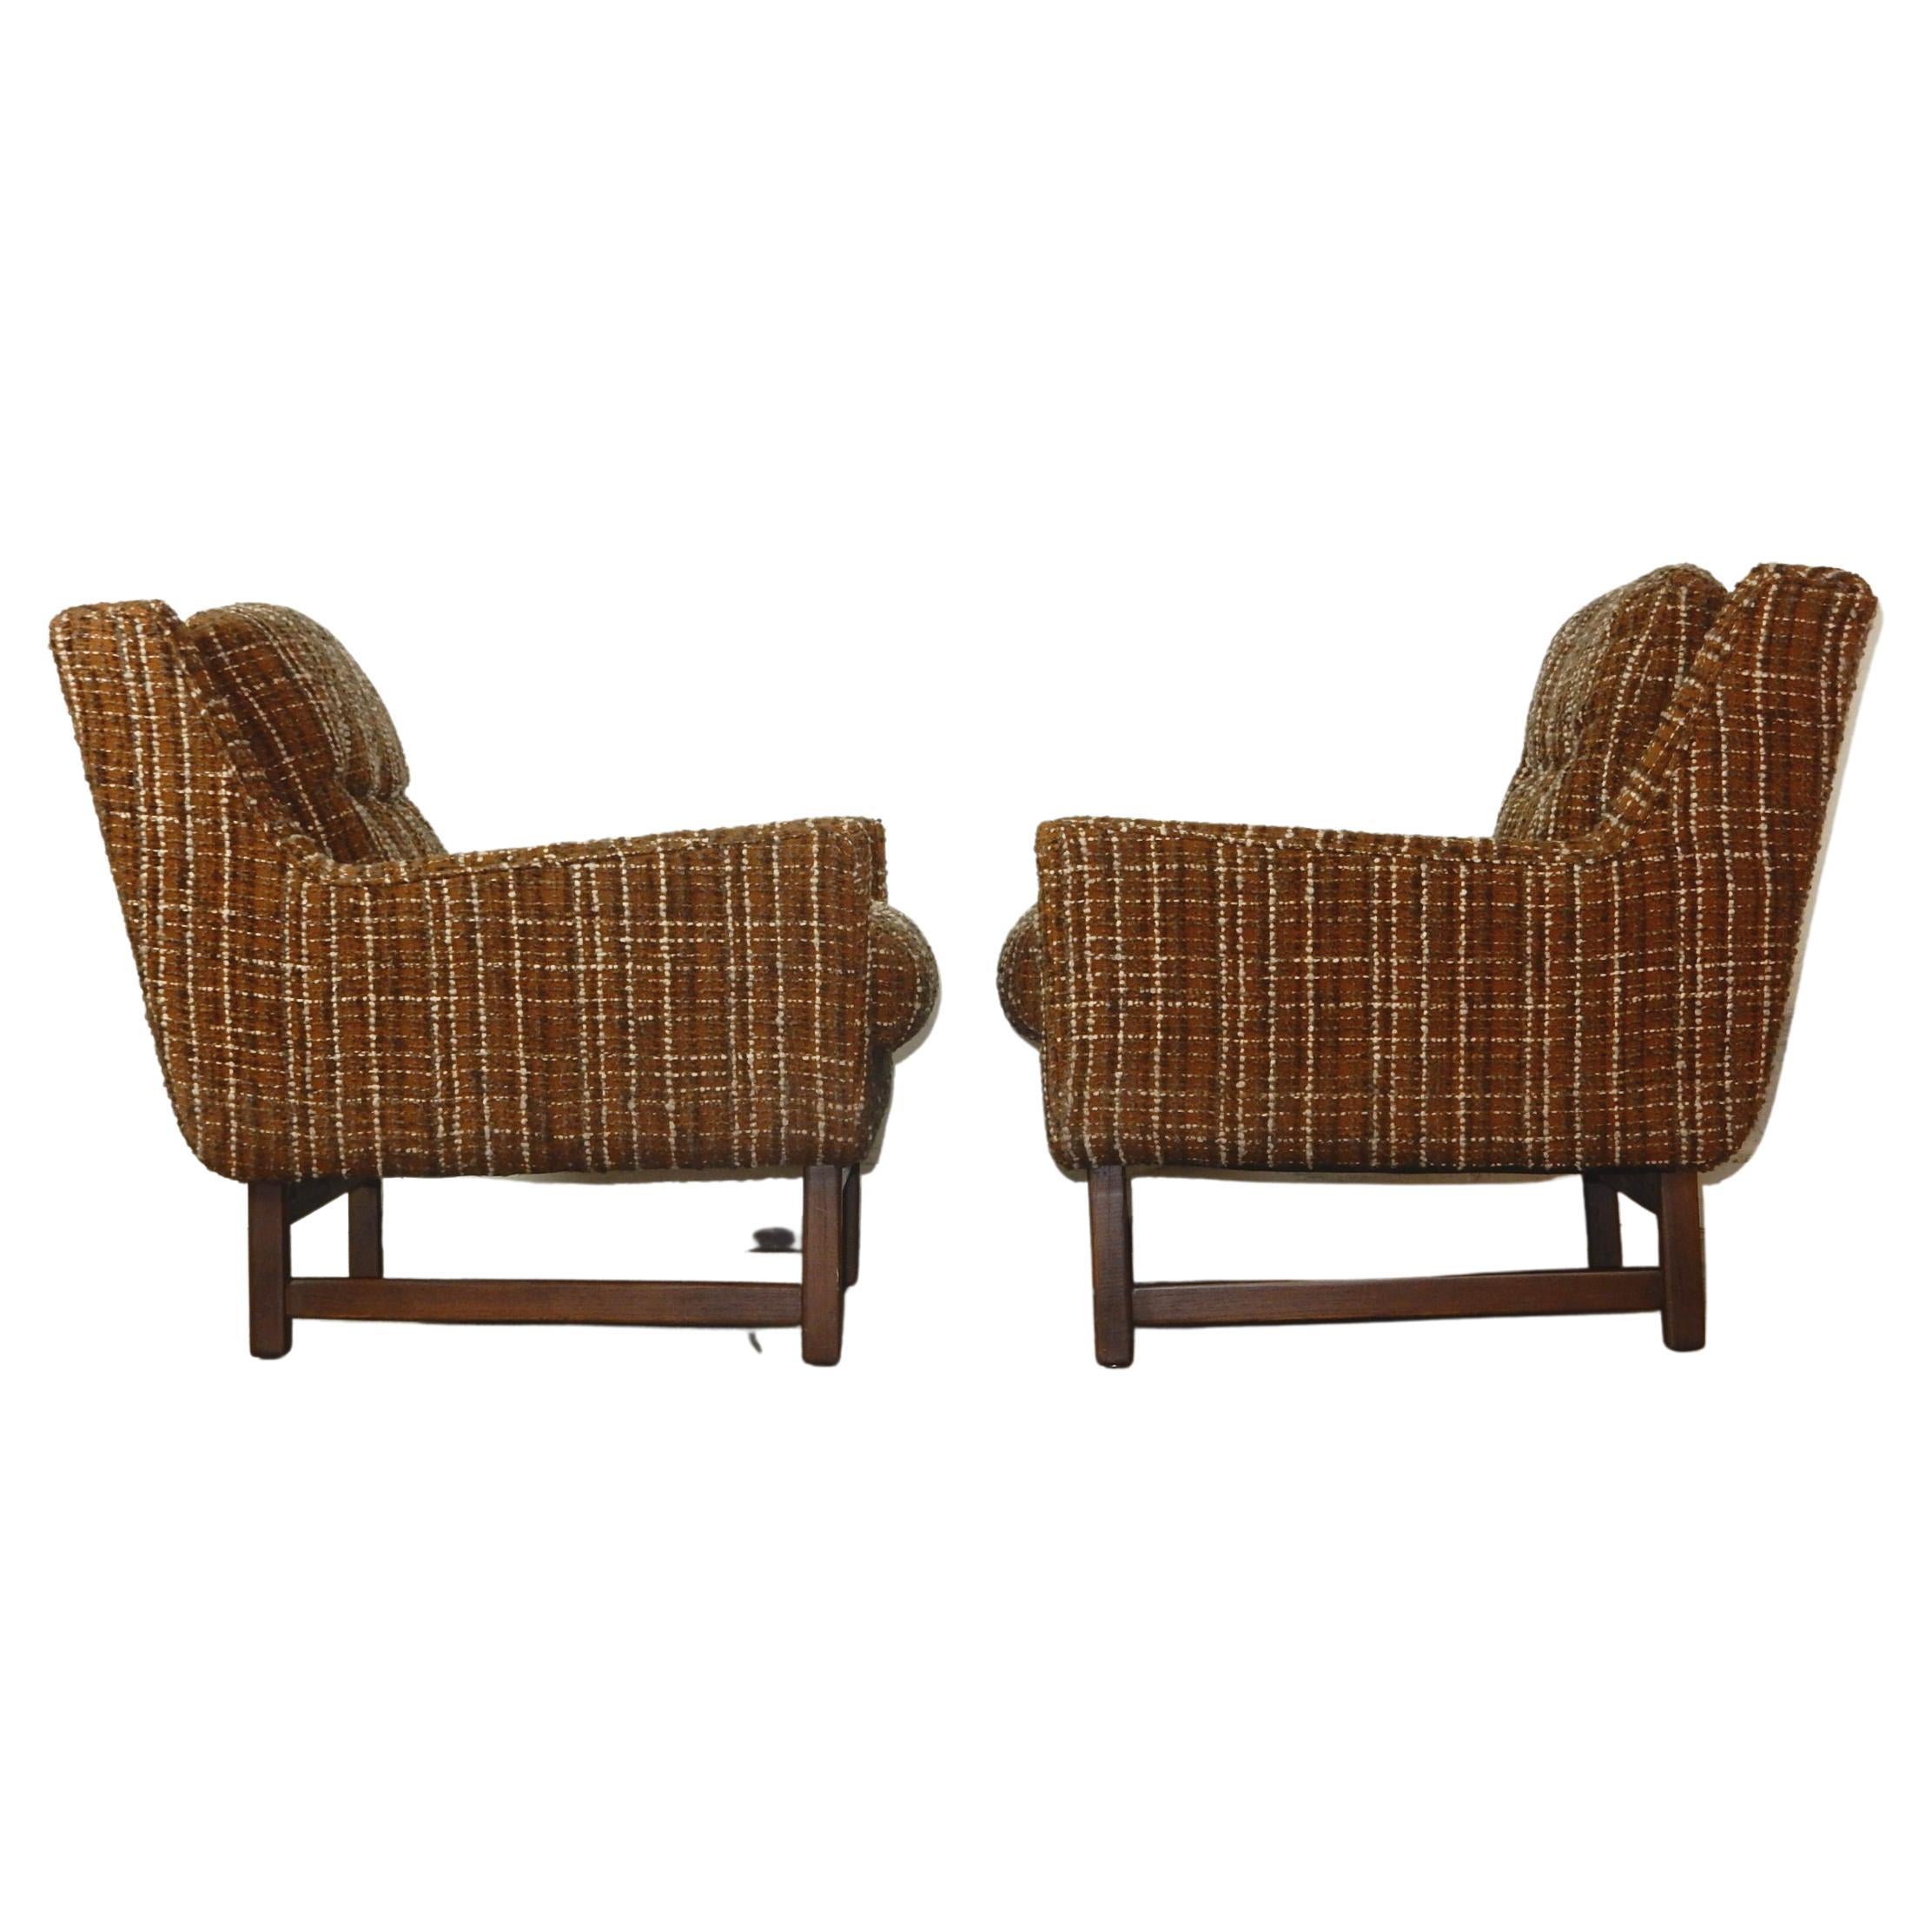 Sexy petite pair of original 1960s lounge chairs in their original nubby wool weave upholstery.
In the style of Jens Risom, they are exceptionally comfortable and plush.
Upholstery and foam are soft. Frames are solid with original dark walnut